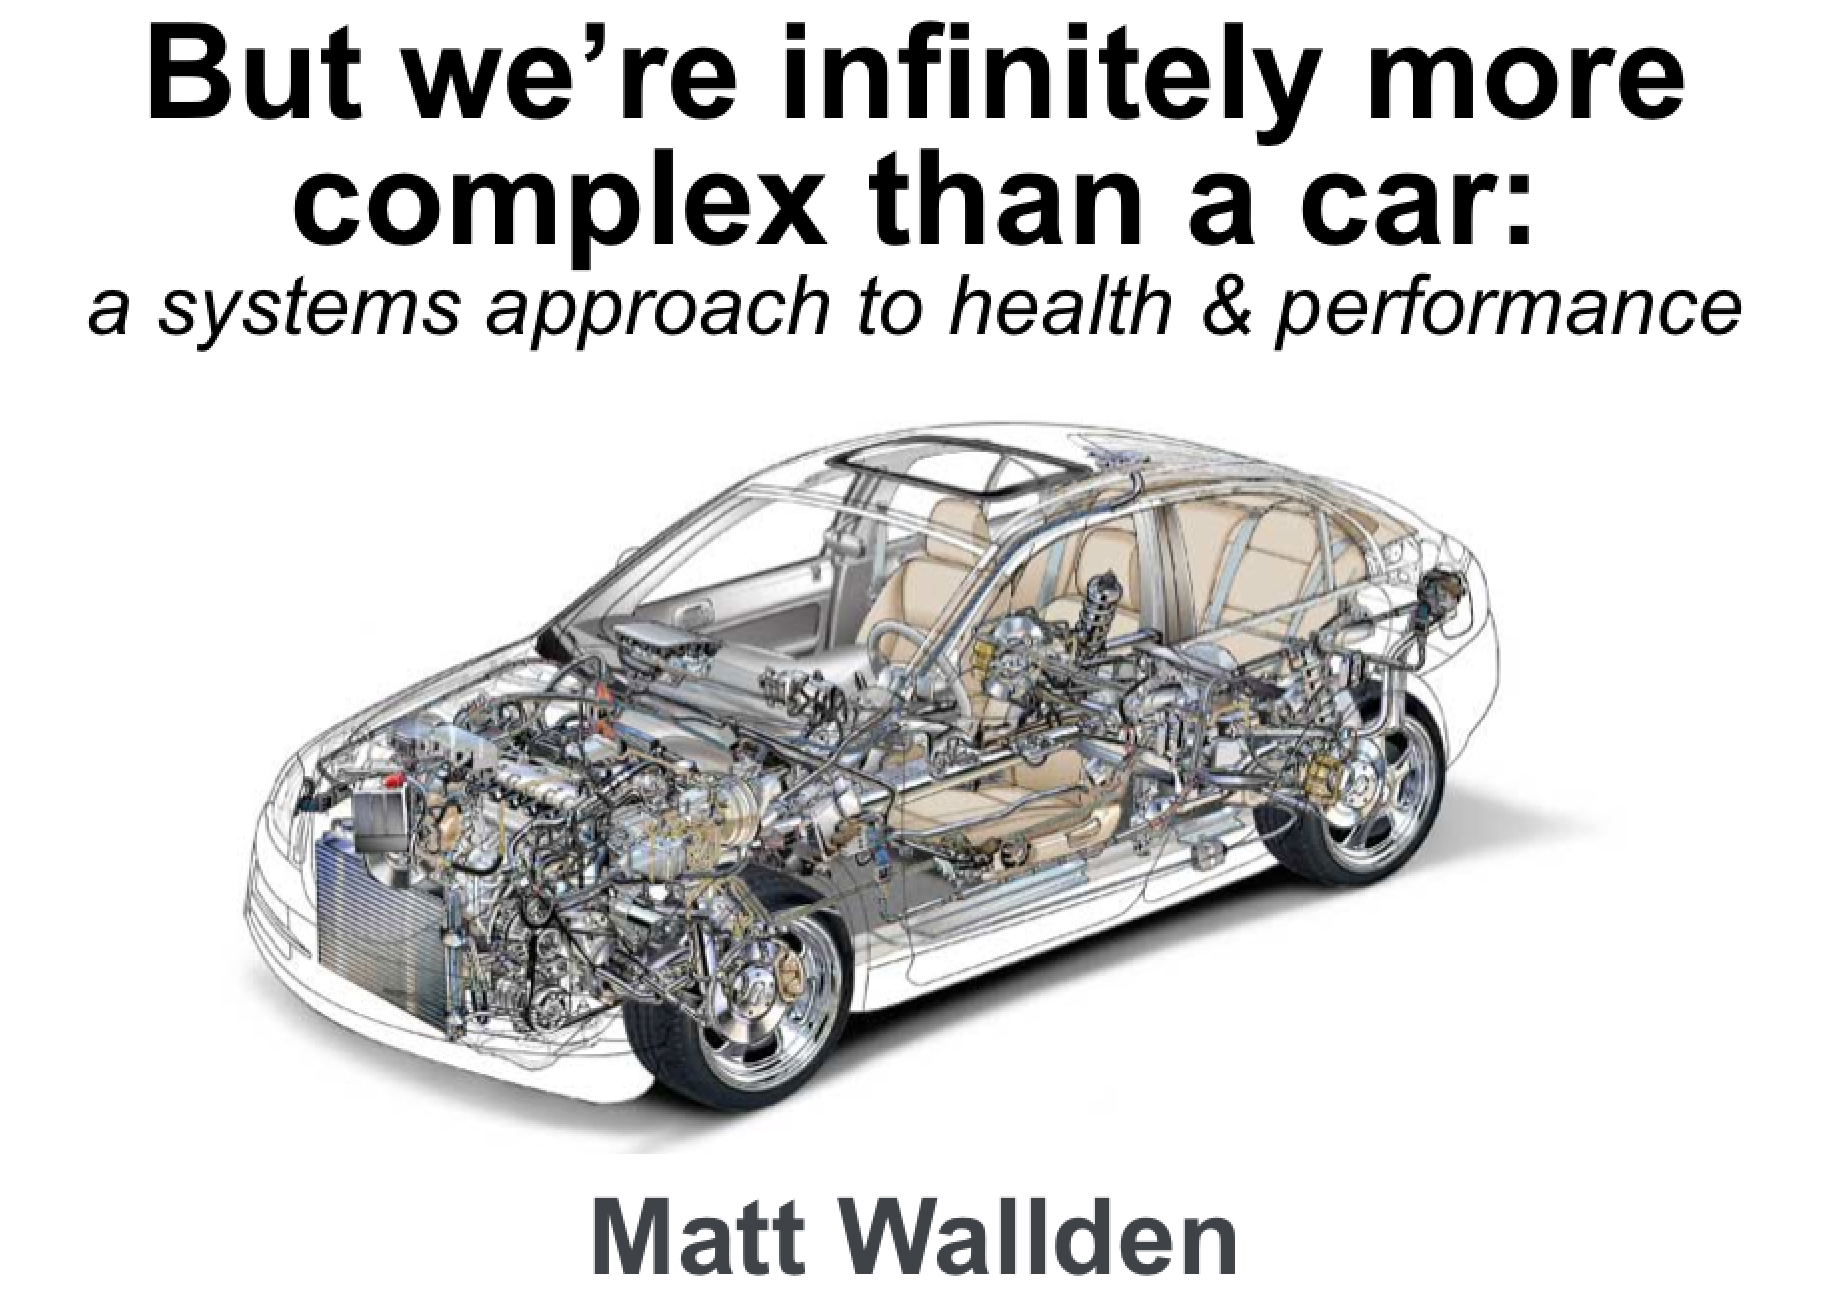 But we're infinitely more complex than a car - Webinar